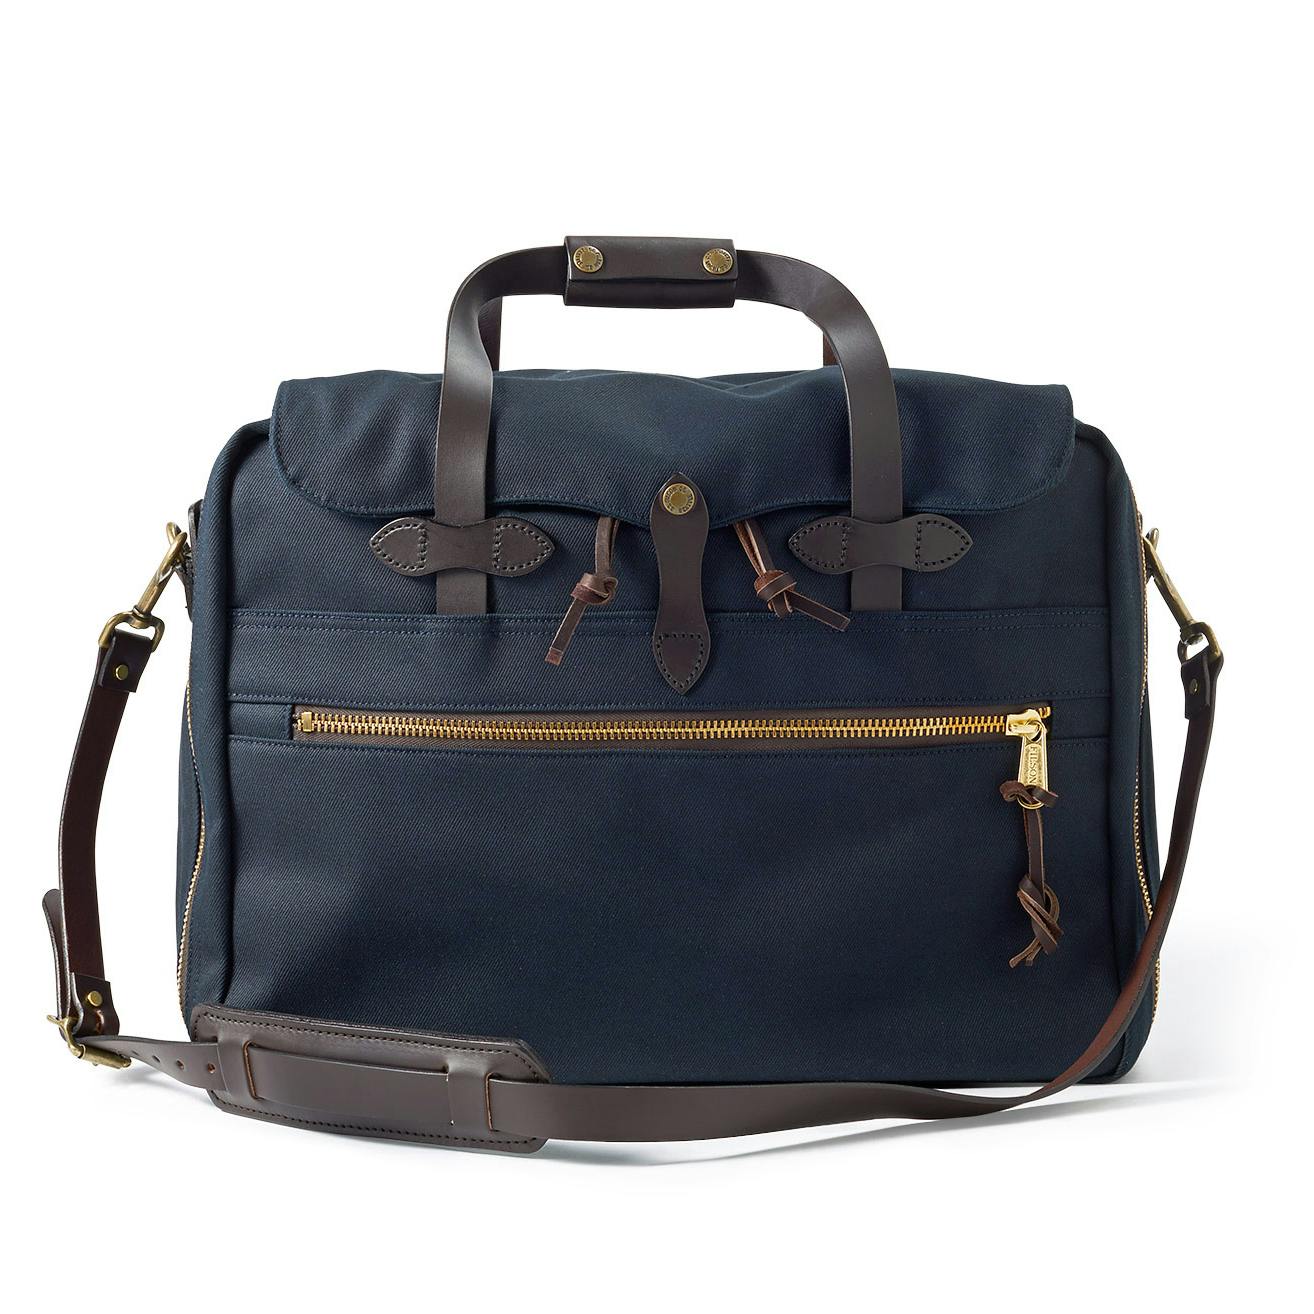 Filson Large Twill Carry-On Travel Bag